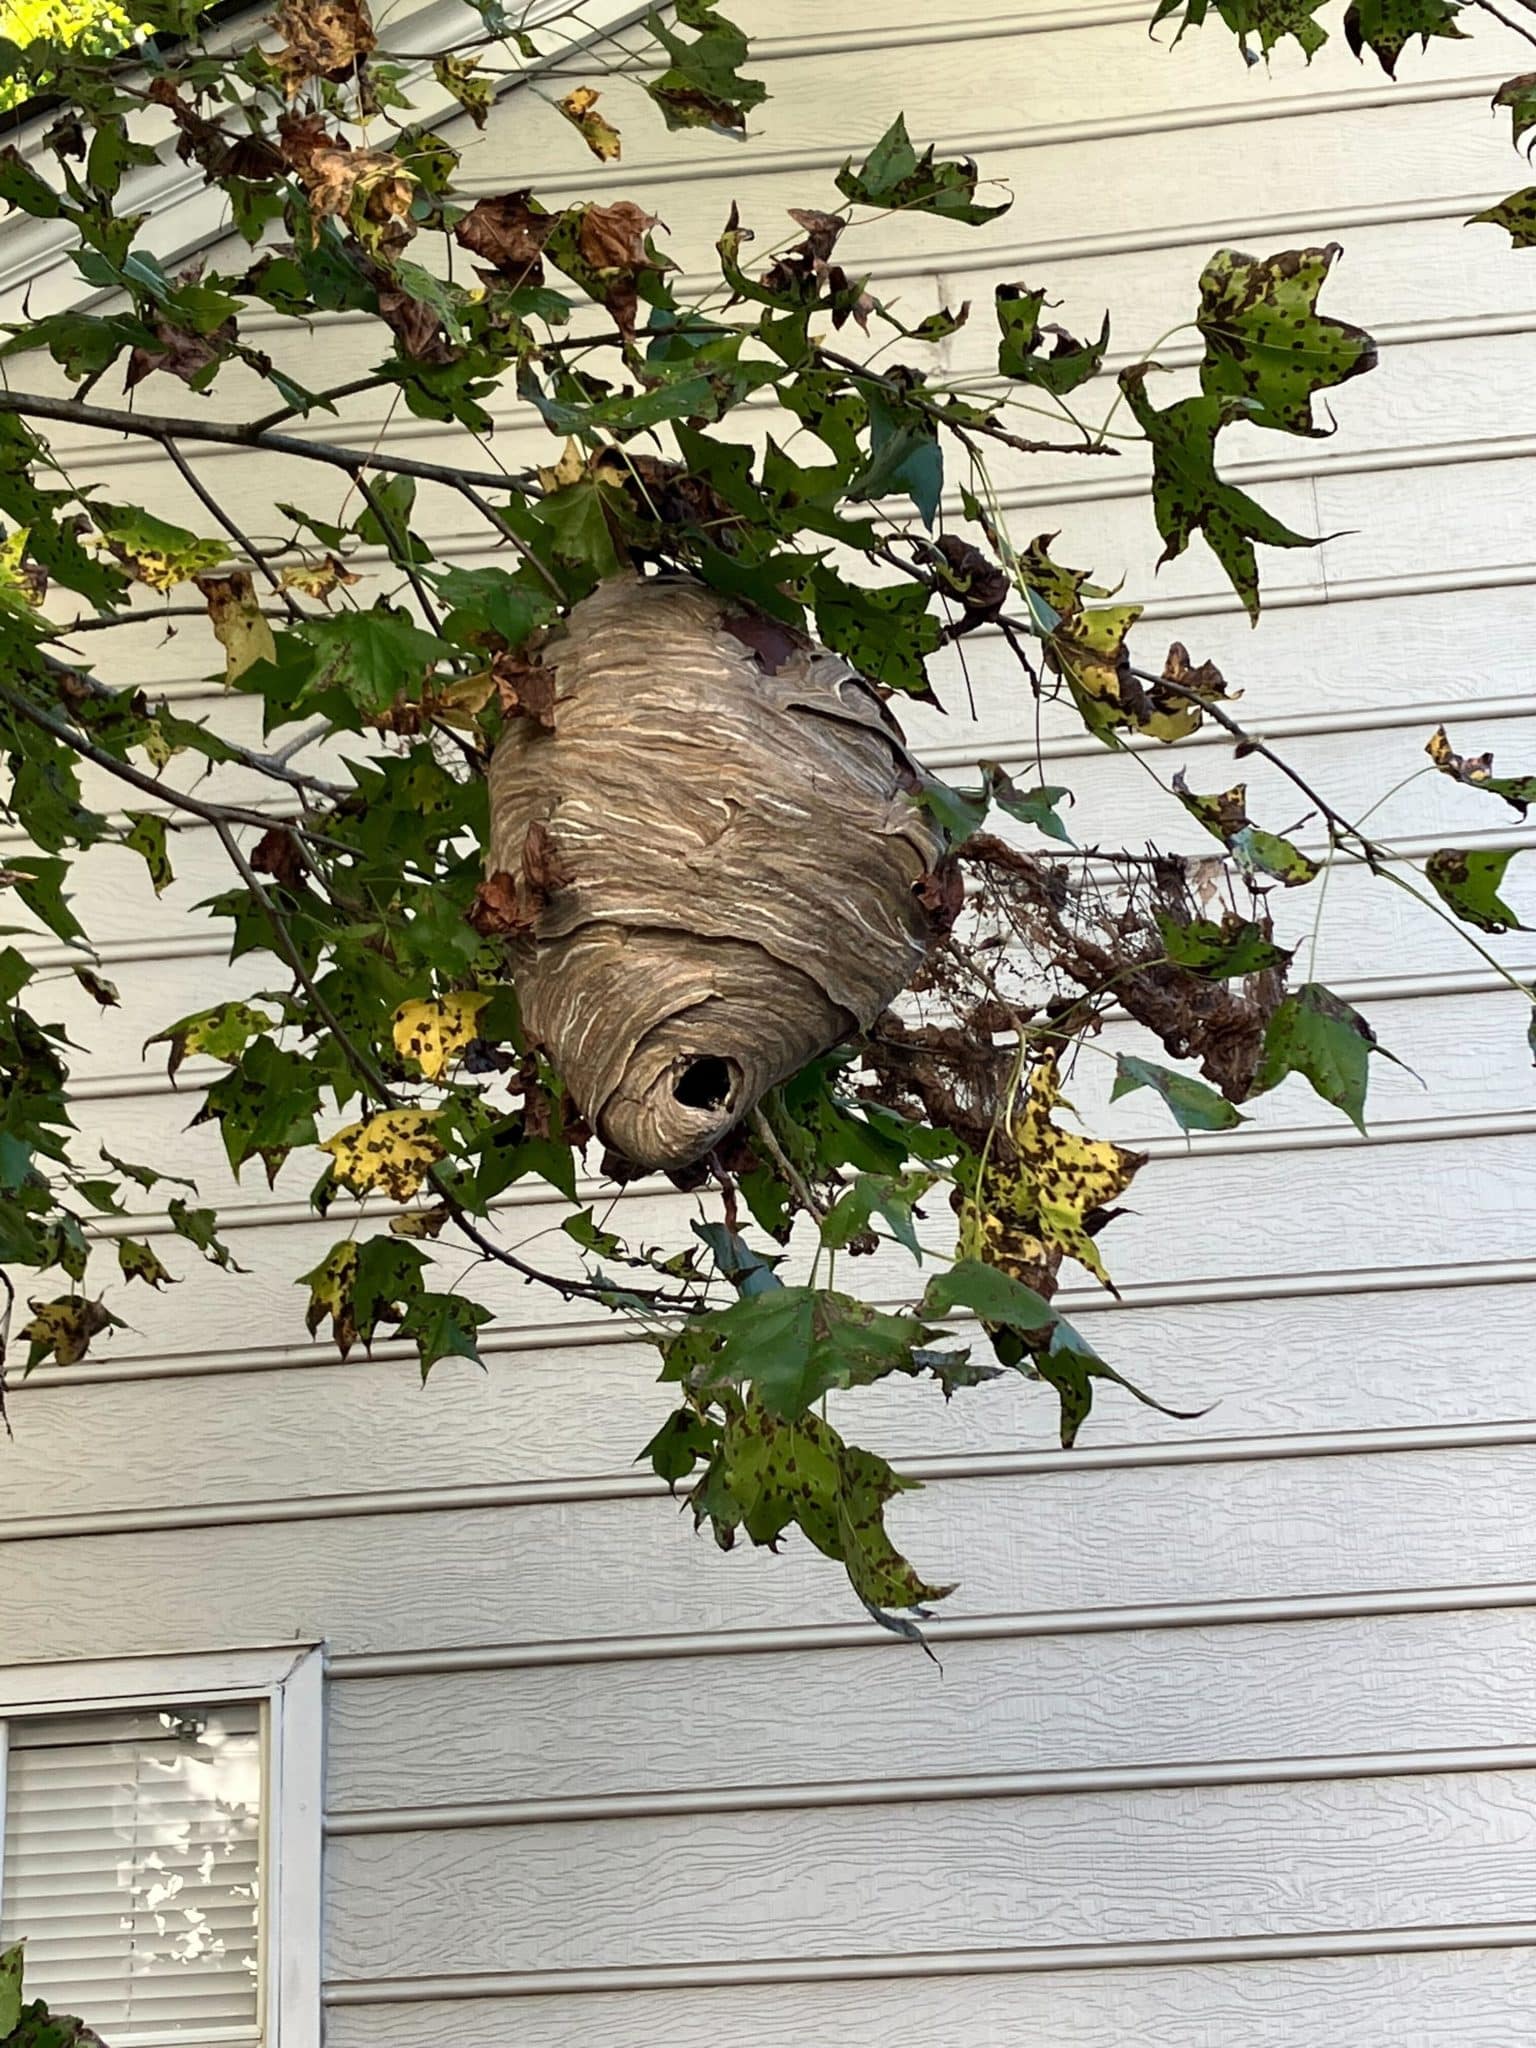 A fully constructed Wasps Nests